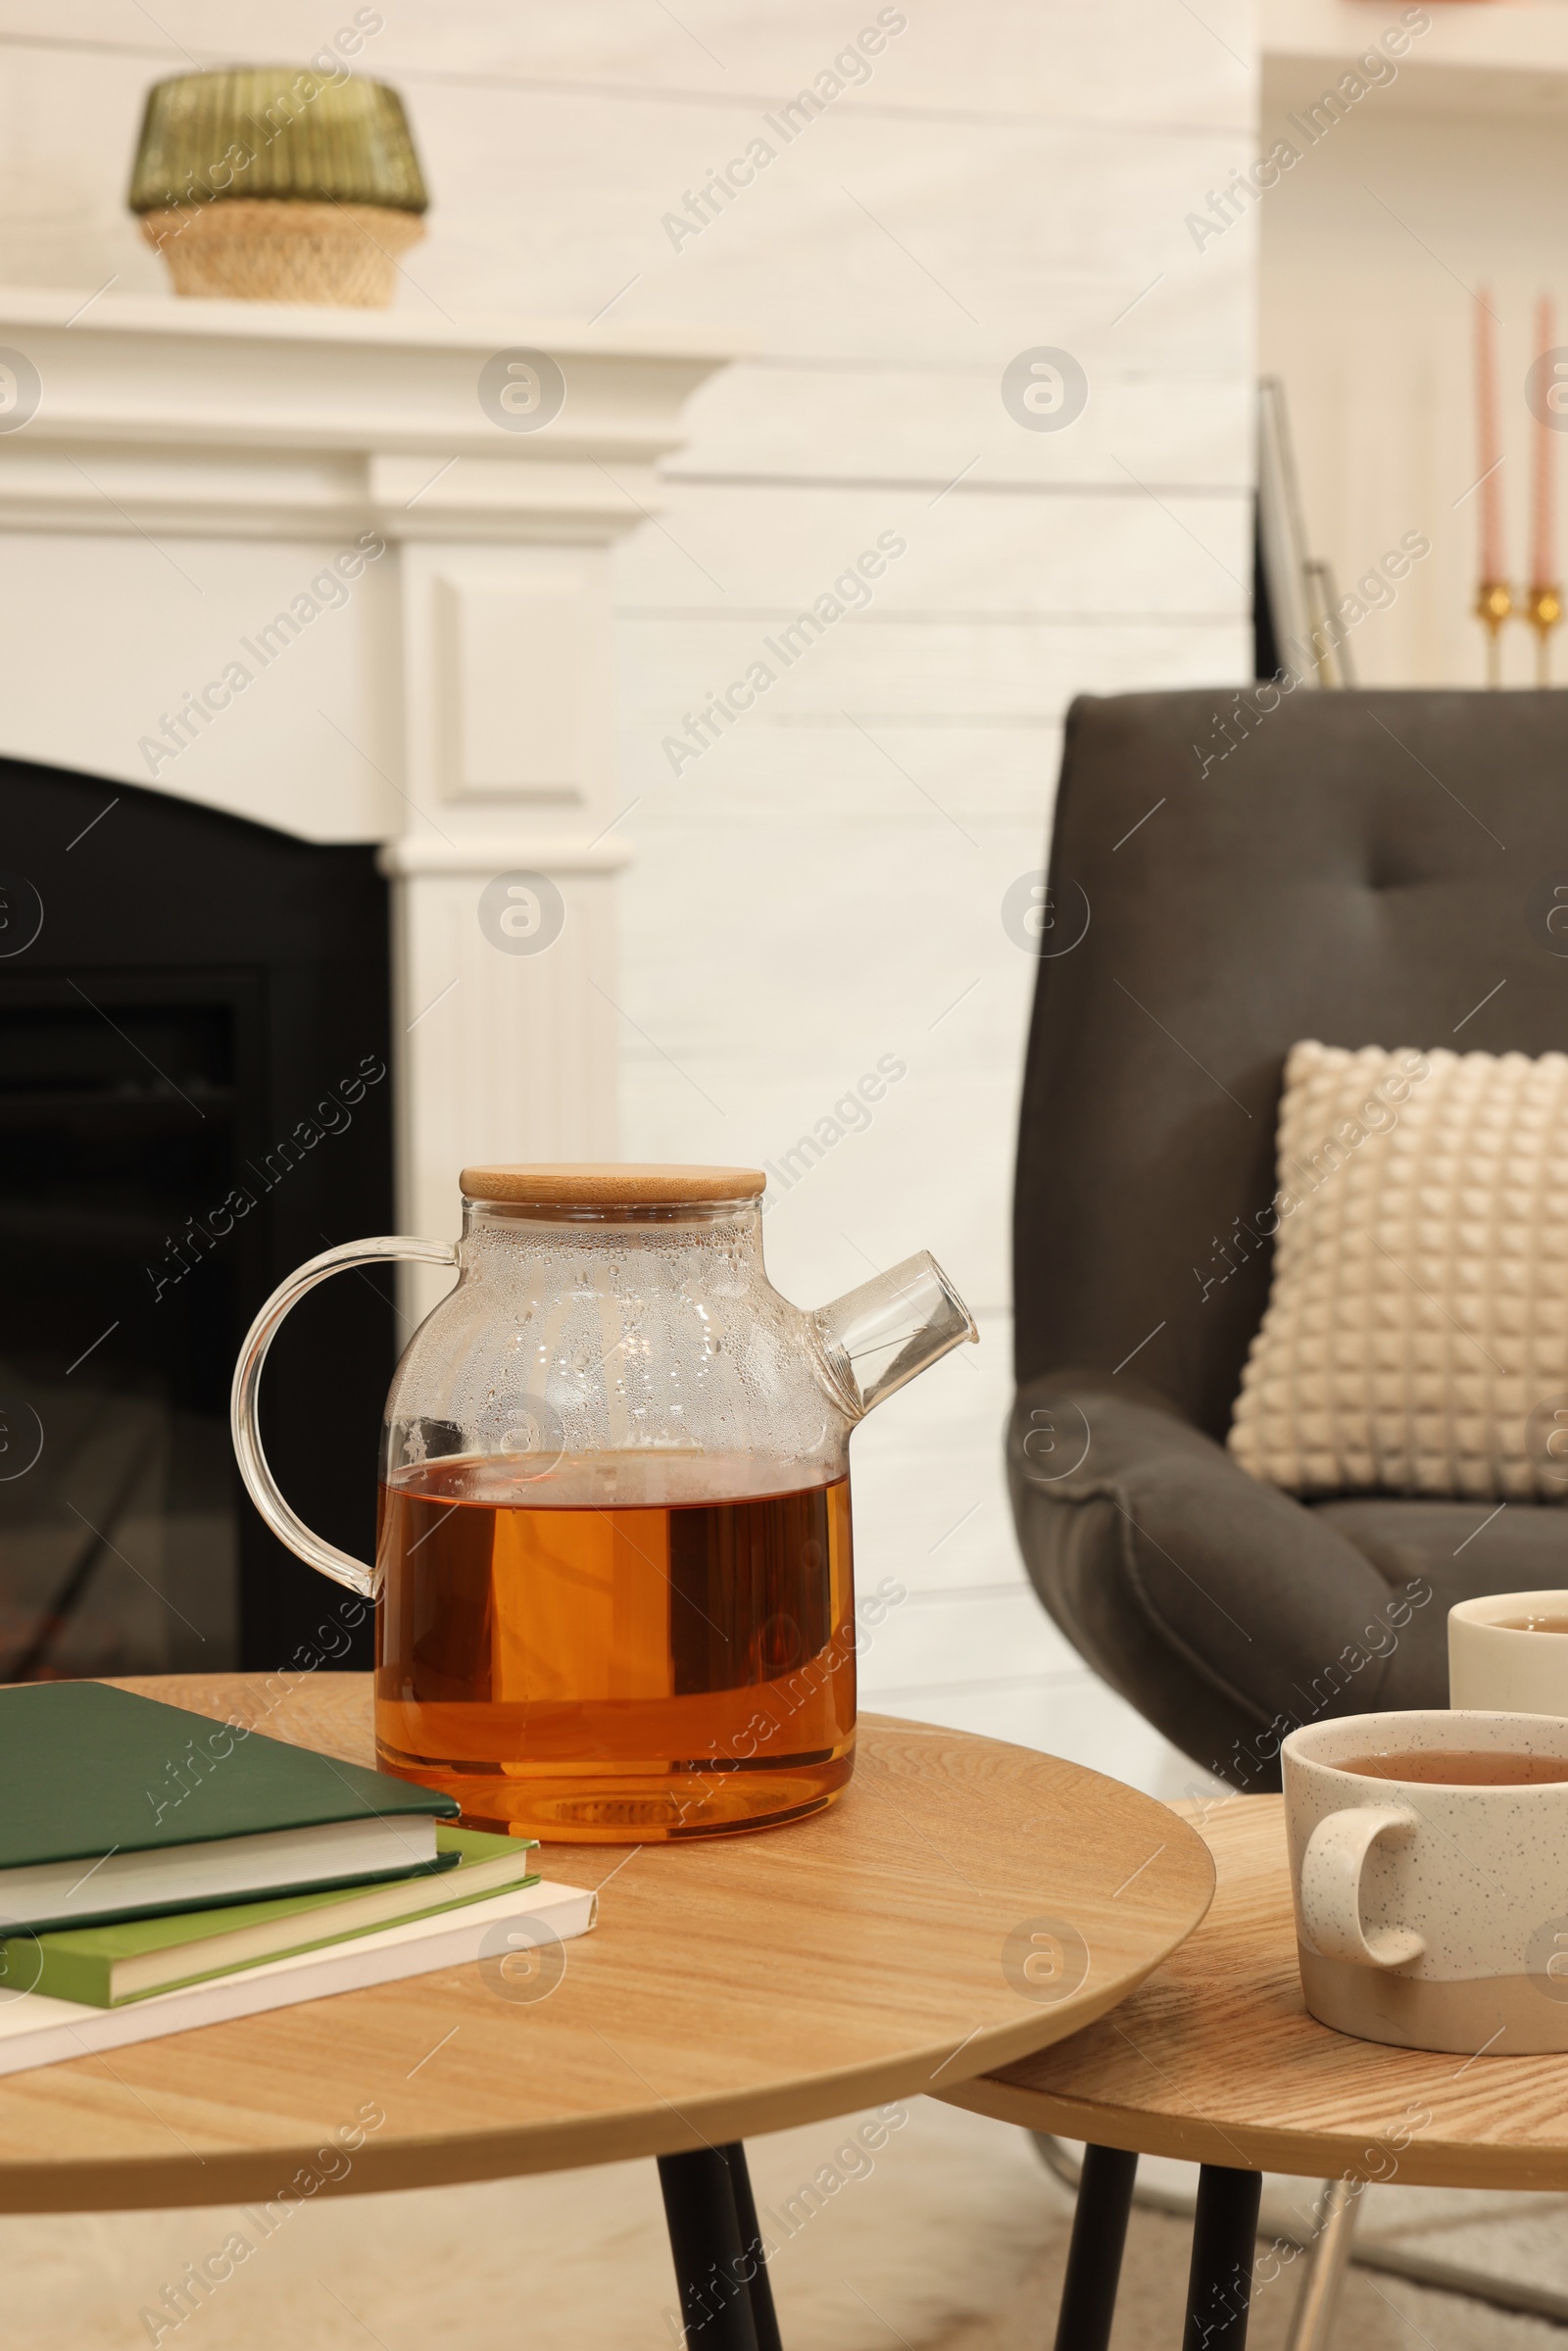 Photo of Teapot, cupshot drink and books on wooden tables near armchair in room. Interior design